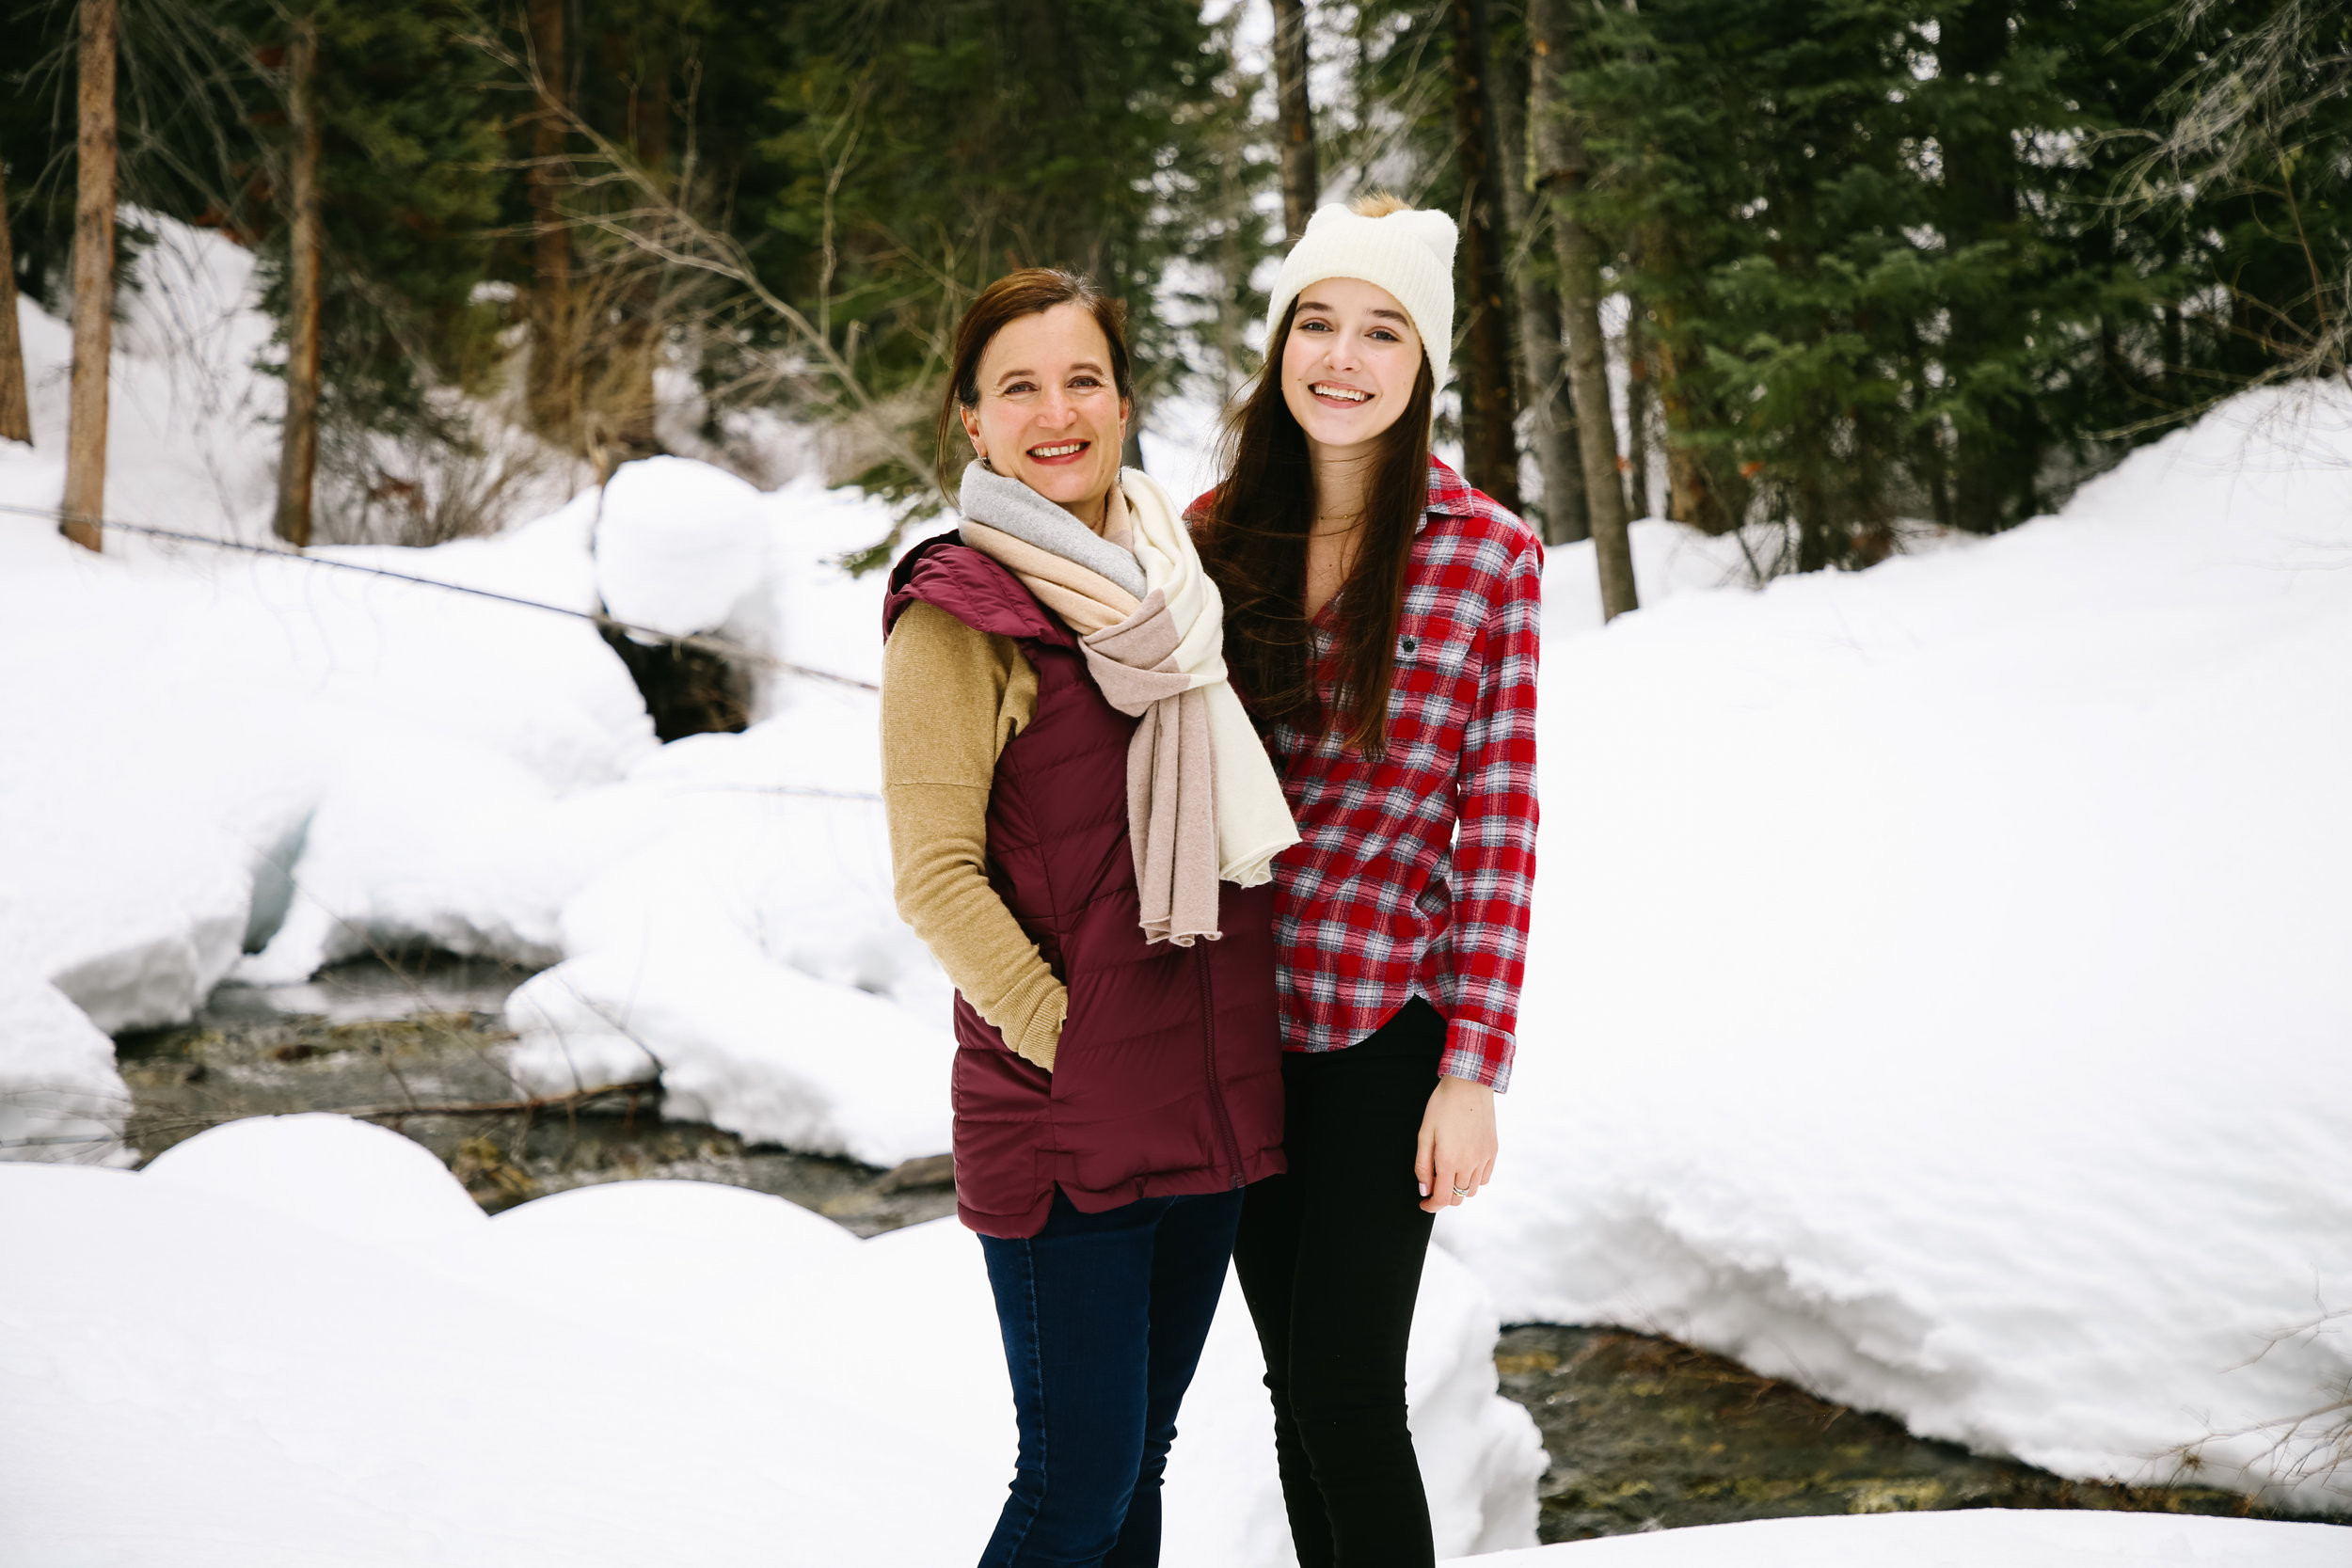 steamboat springs winter photography